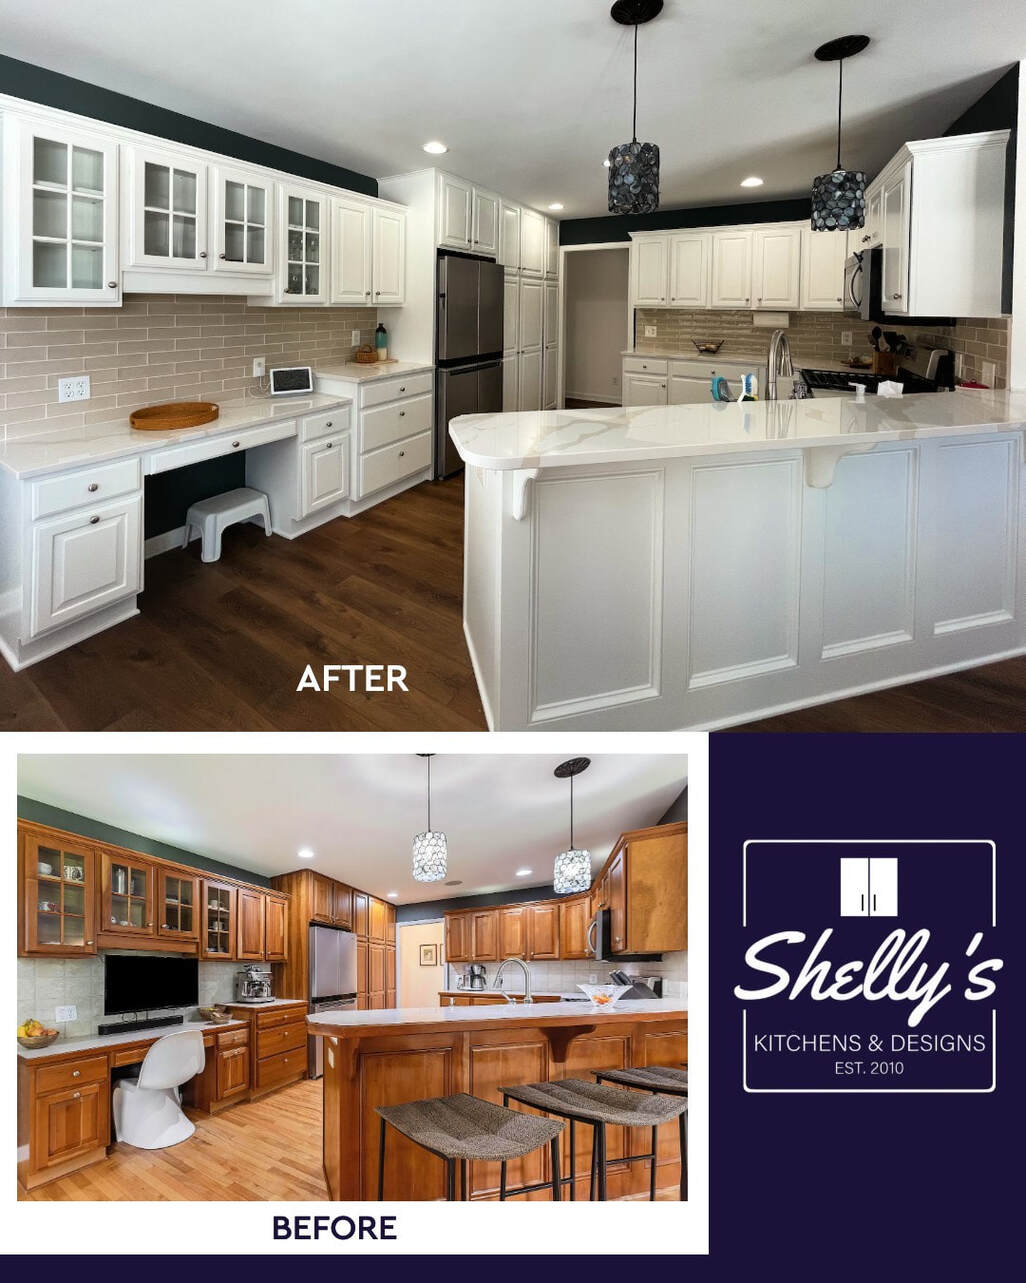 before and after kitchen cabinet painting, before and after kitchen cabinet refinishing, shelly’s kitchens, kitchen cabinet painting, kitchen cabinet refinishing, cabinet painters near me, cabinet refinishers near me, 